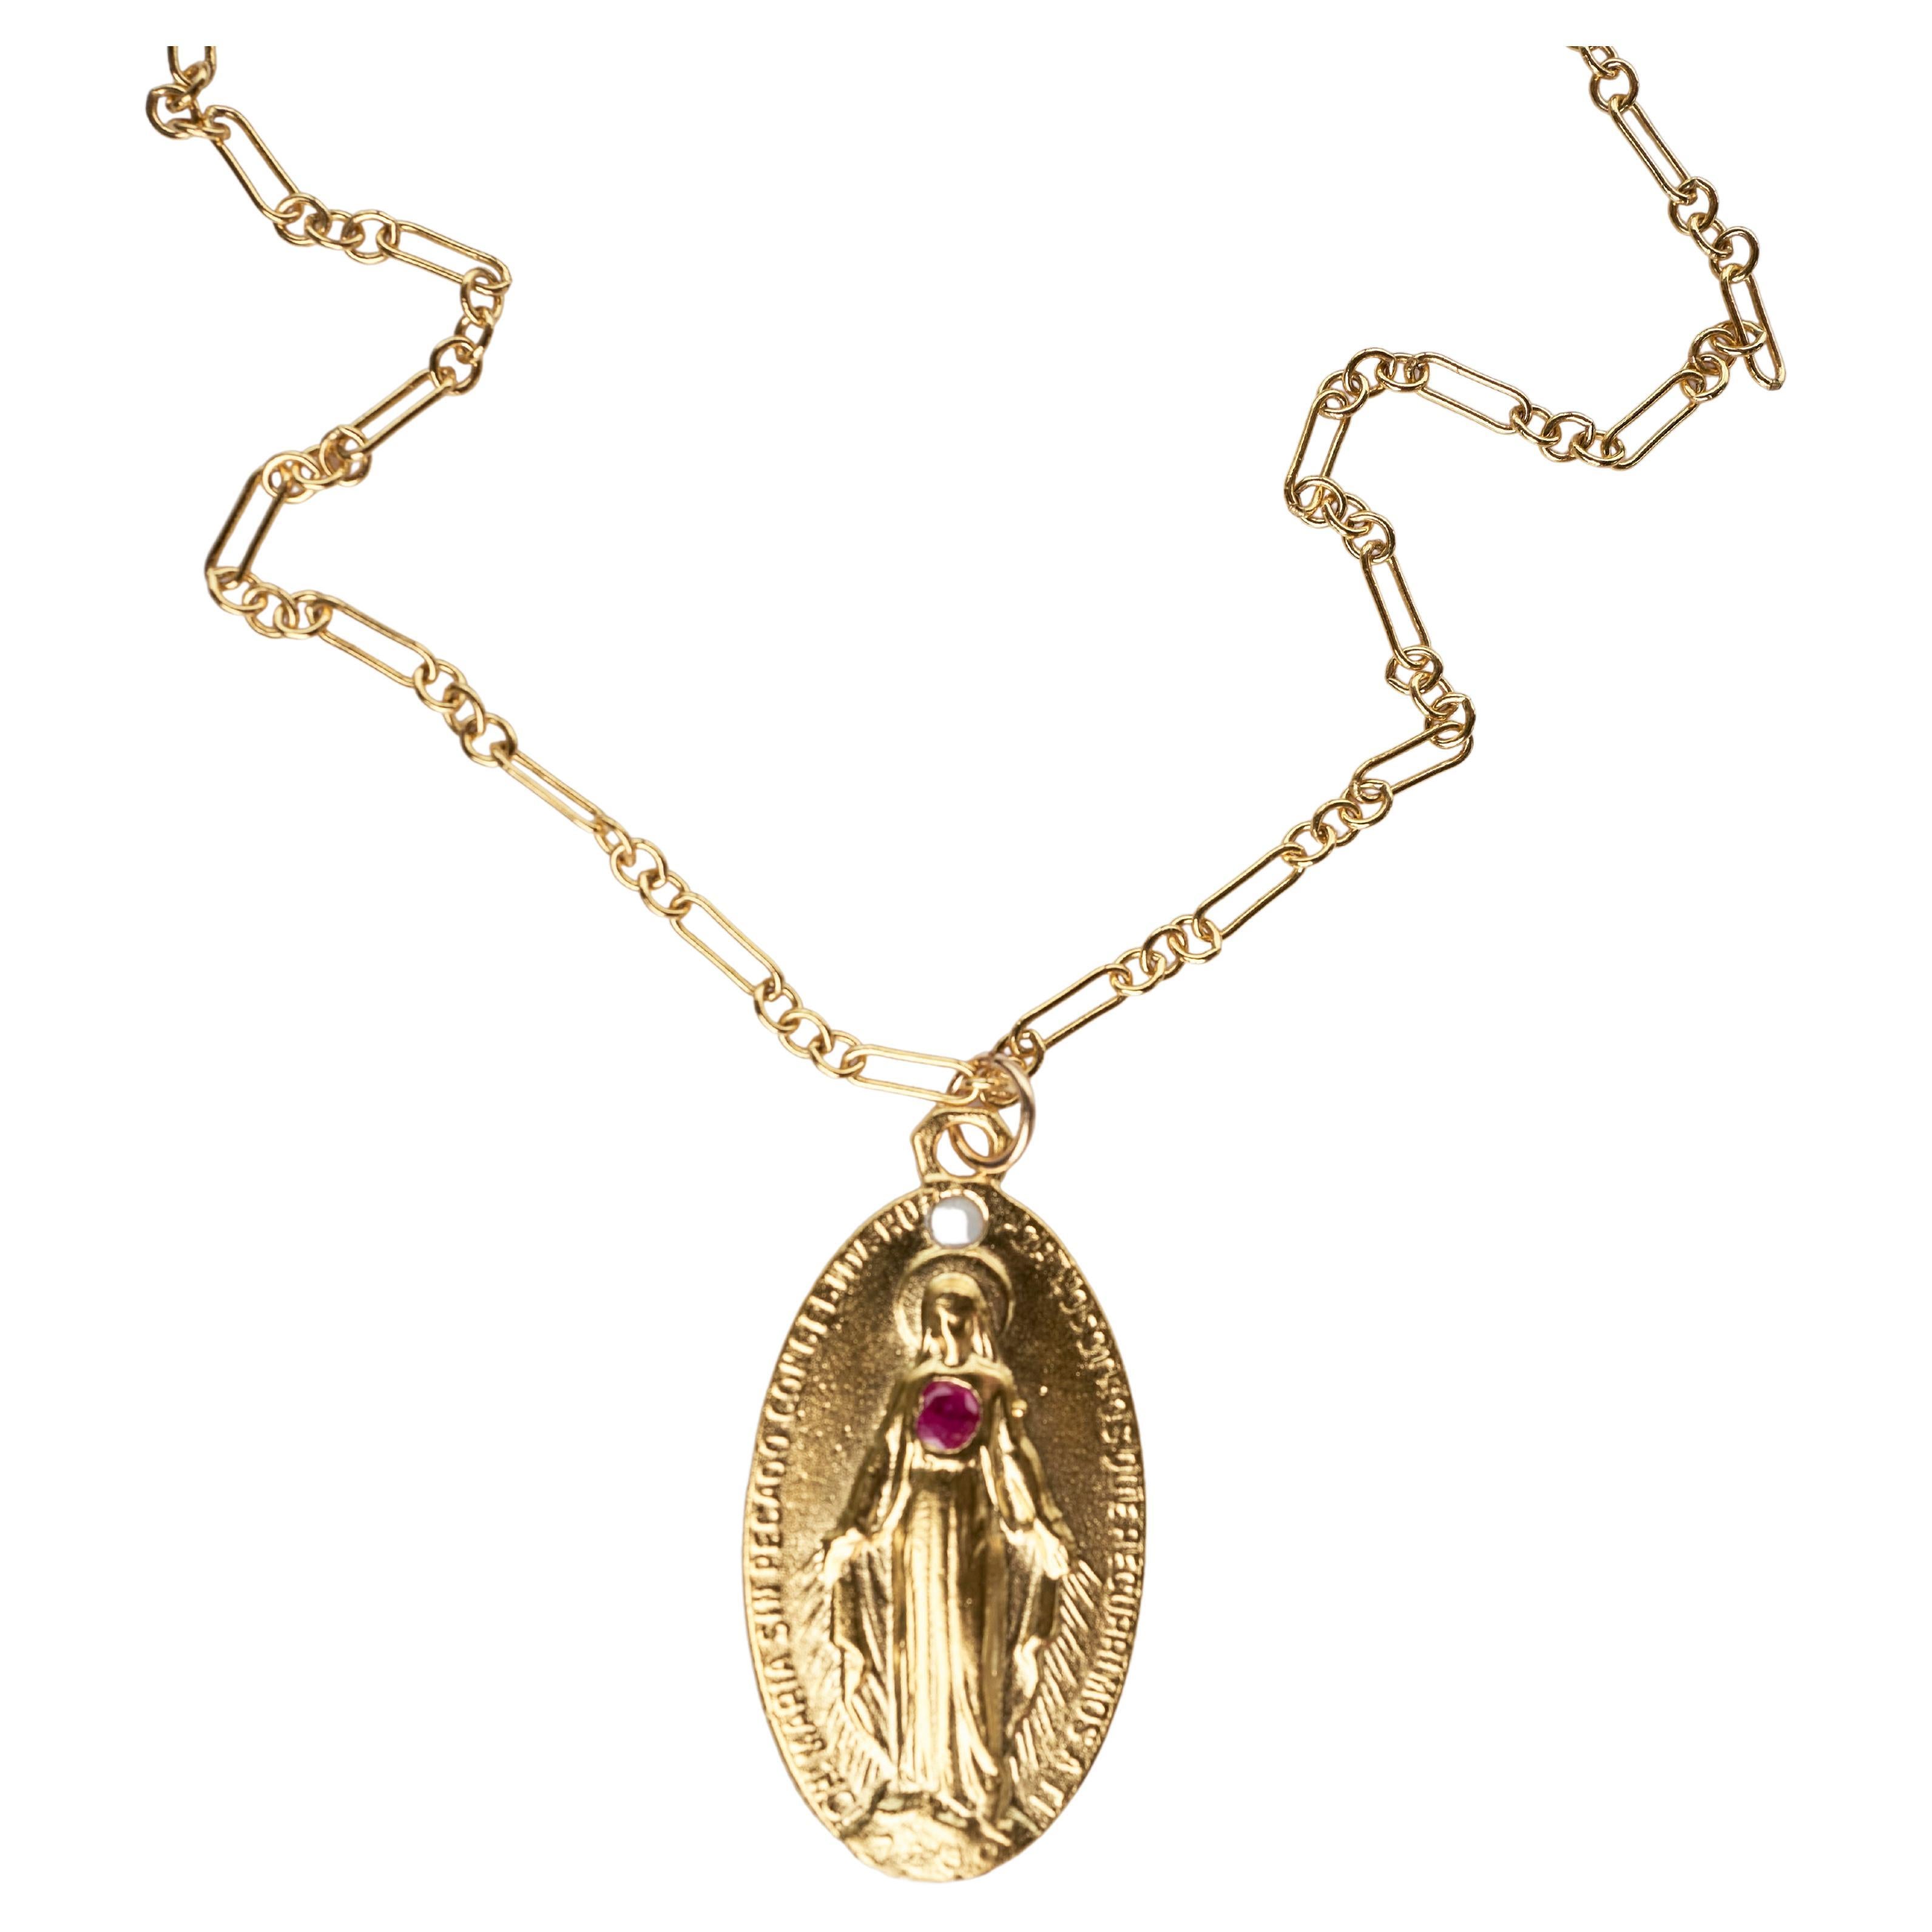 Ruby Opal Medal Virgin Mary Chain Necklace
Designer: J Dauphin
10k Gold Plated Brass Medal and Gold Filled Chain

Symbols or medals can become a powerful tool in our arsenal for the spiritual. 
Since ancient times spiritual pendants, religious